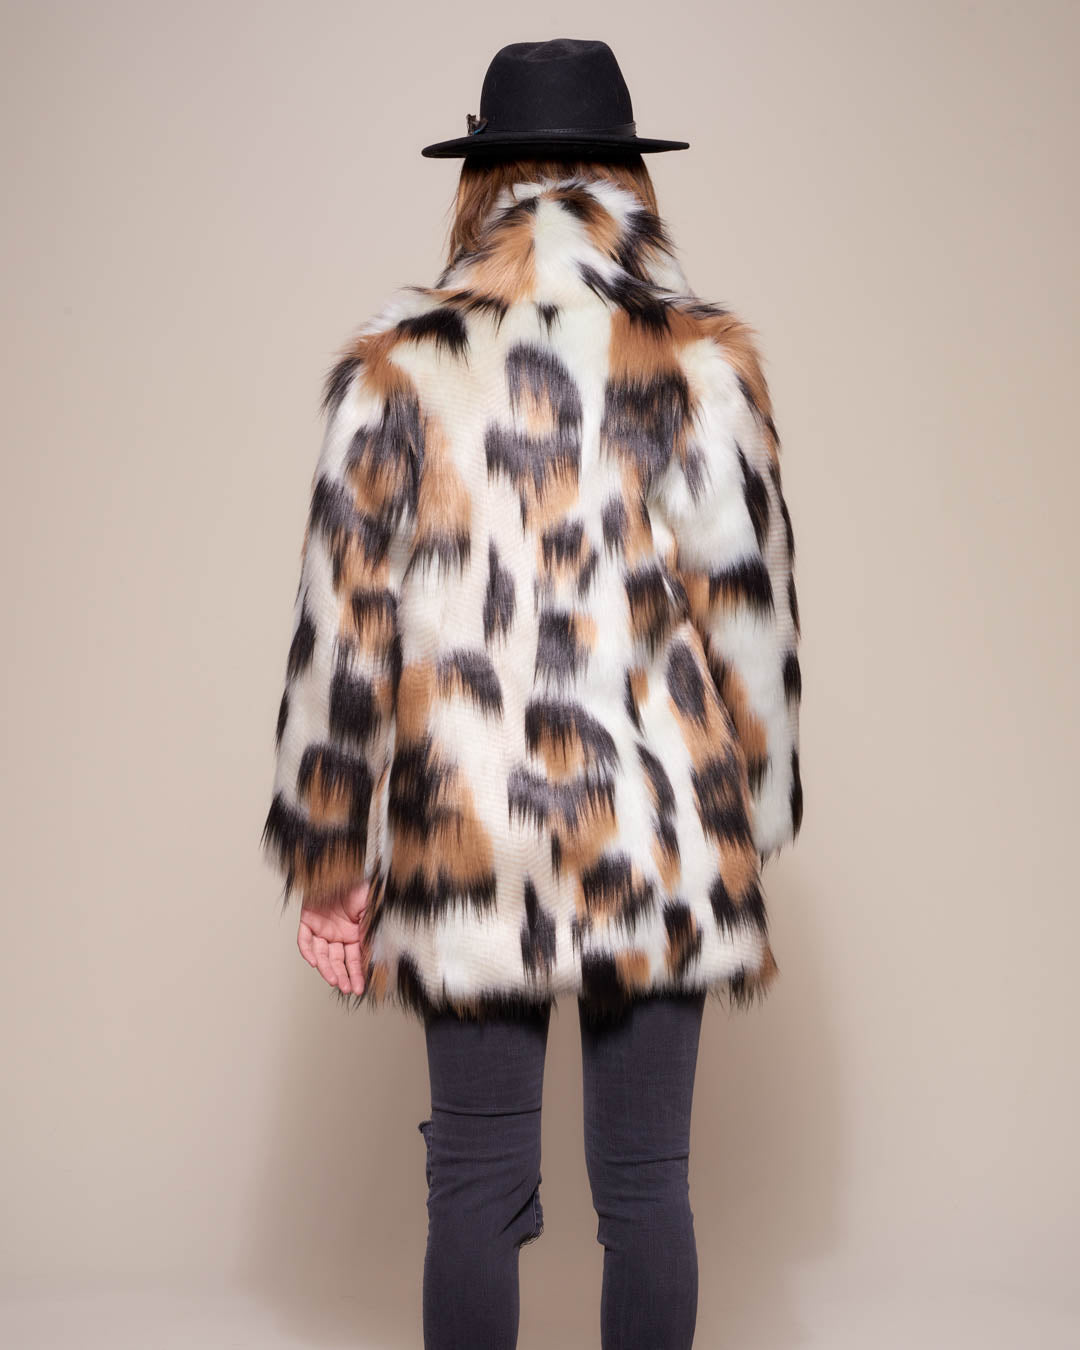 Back View of Manx Cat Collared Faux Fur Coat 